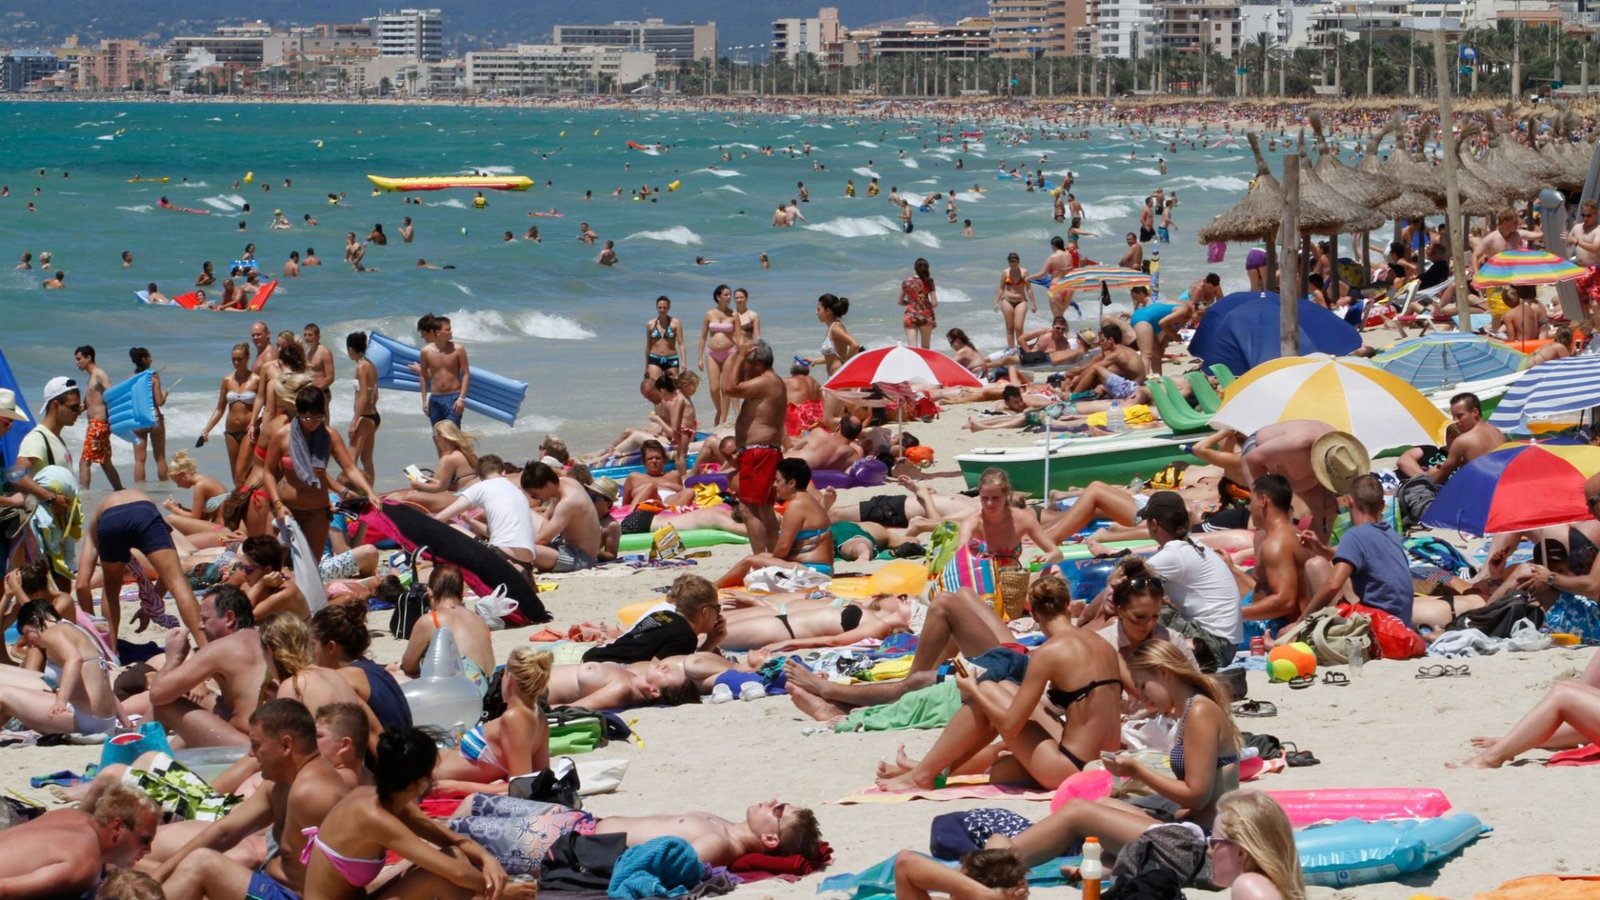 Brit tourists in Spain warned to watch out for violent criminals after two sport stars are robbed by gangs